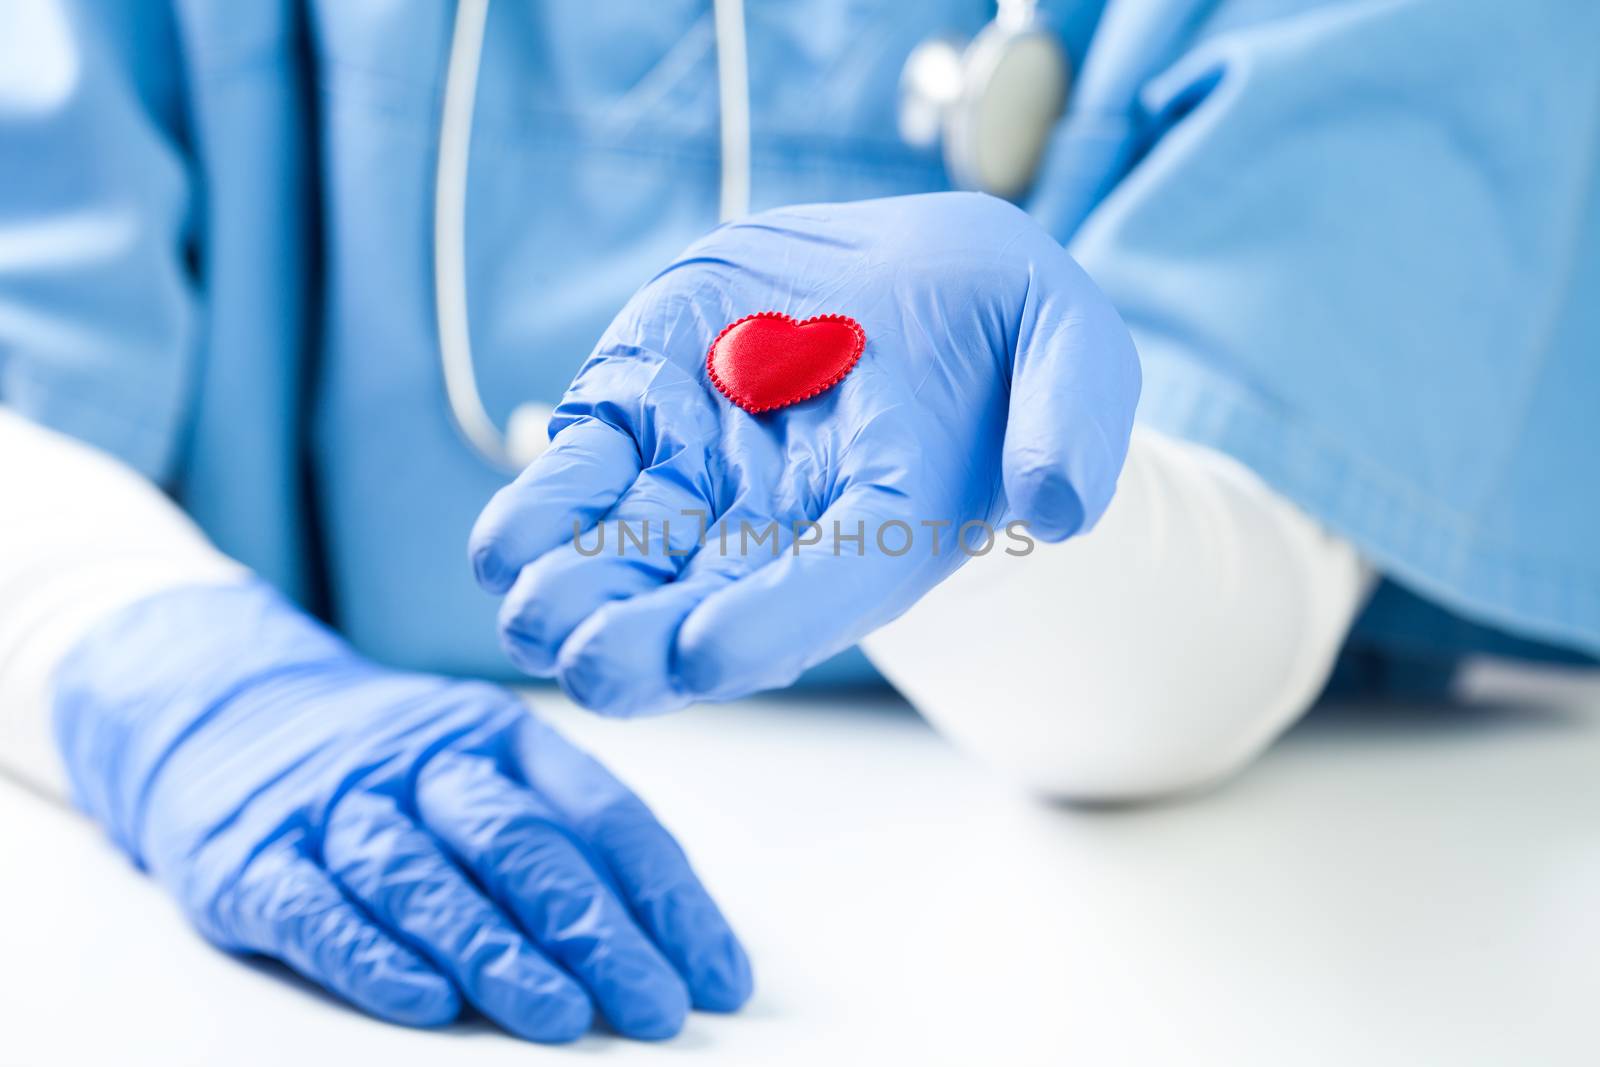 Female doctor holding small red heart on palm of hand, wearing blue NHS uniform, detail closeup, frequent healthcare check up and disease prevention concept, Coronavirus COVID-19 global crisis 